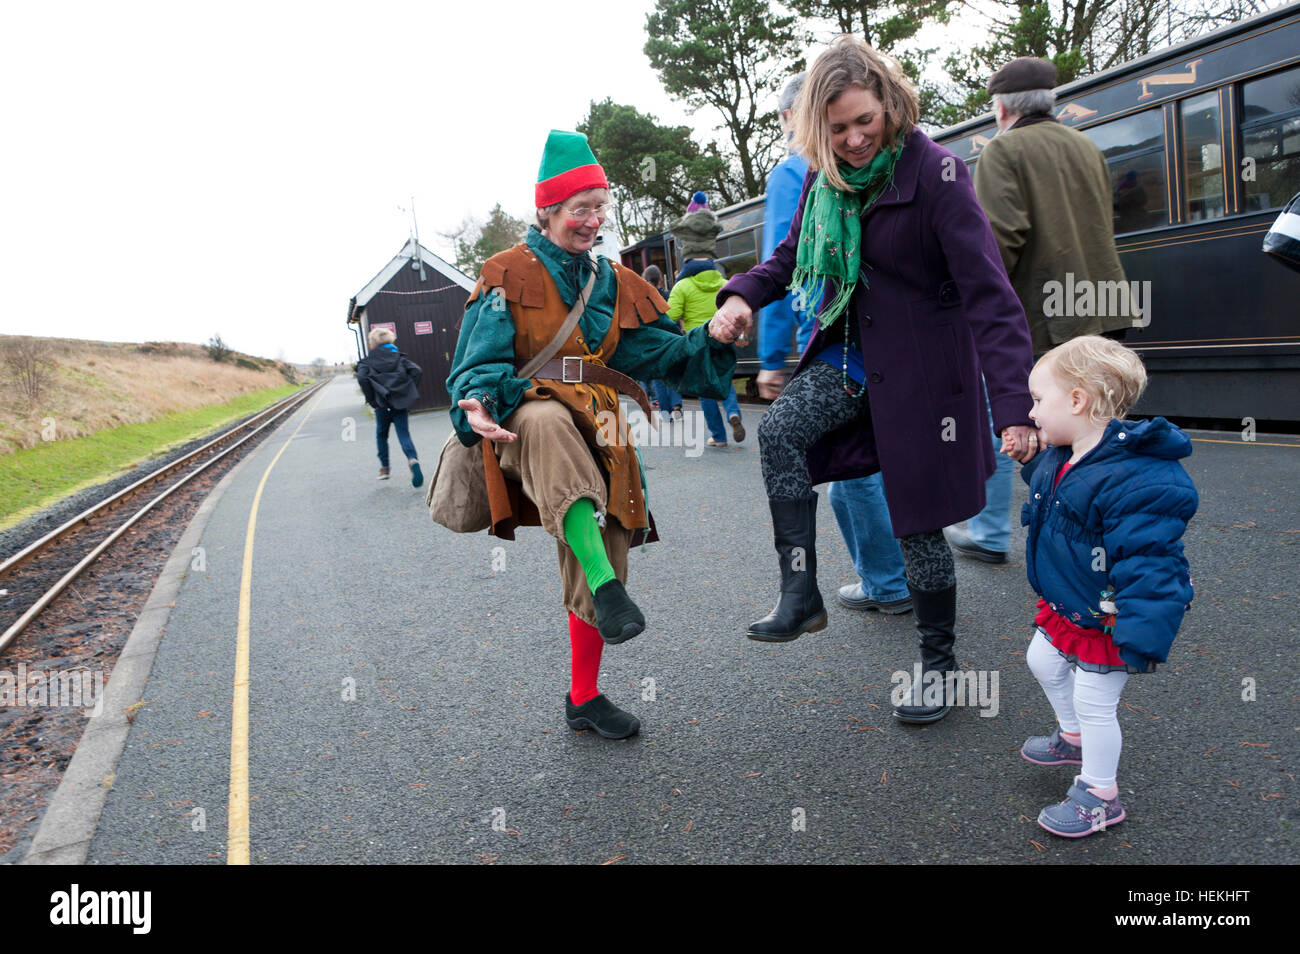 Rhyd Ddu, Gwynedd, Snowdonia National Park, Wales, UK. 22nd, December, 2016. One of Santa's Elves amuses a young child on the platform at Rhyd Ddu station. The Santa train - Caernarfon to Rhyd Ddu - is seen at the turn around point at Rhyd Ddu. The Steam locomotive is Beyer-Garratt made in Manchester in 1958 and shipped to South Africa. © Graham M. Lawrence/Alamy Live News. Stock Photo